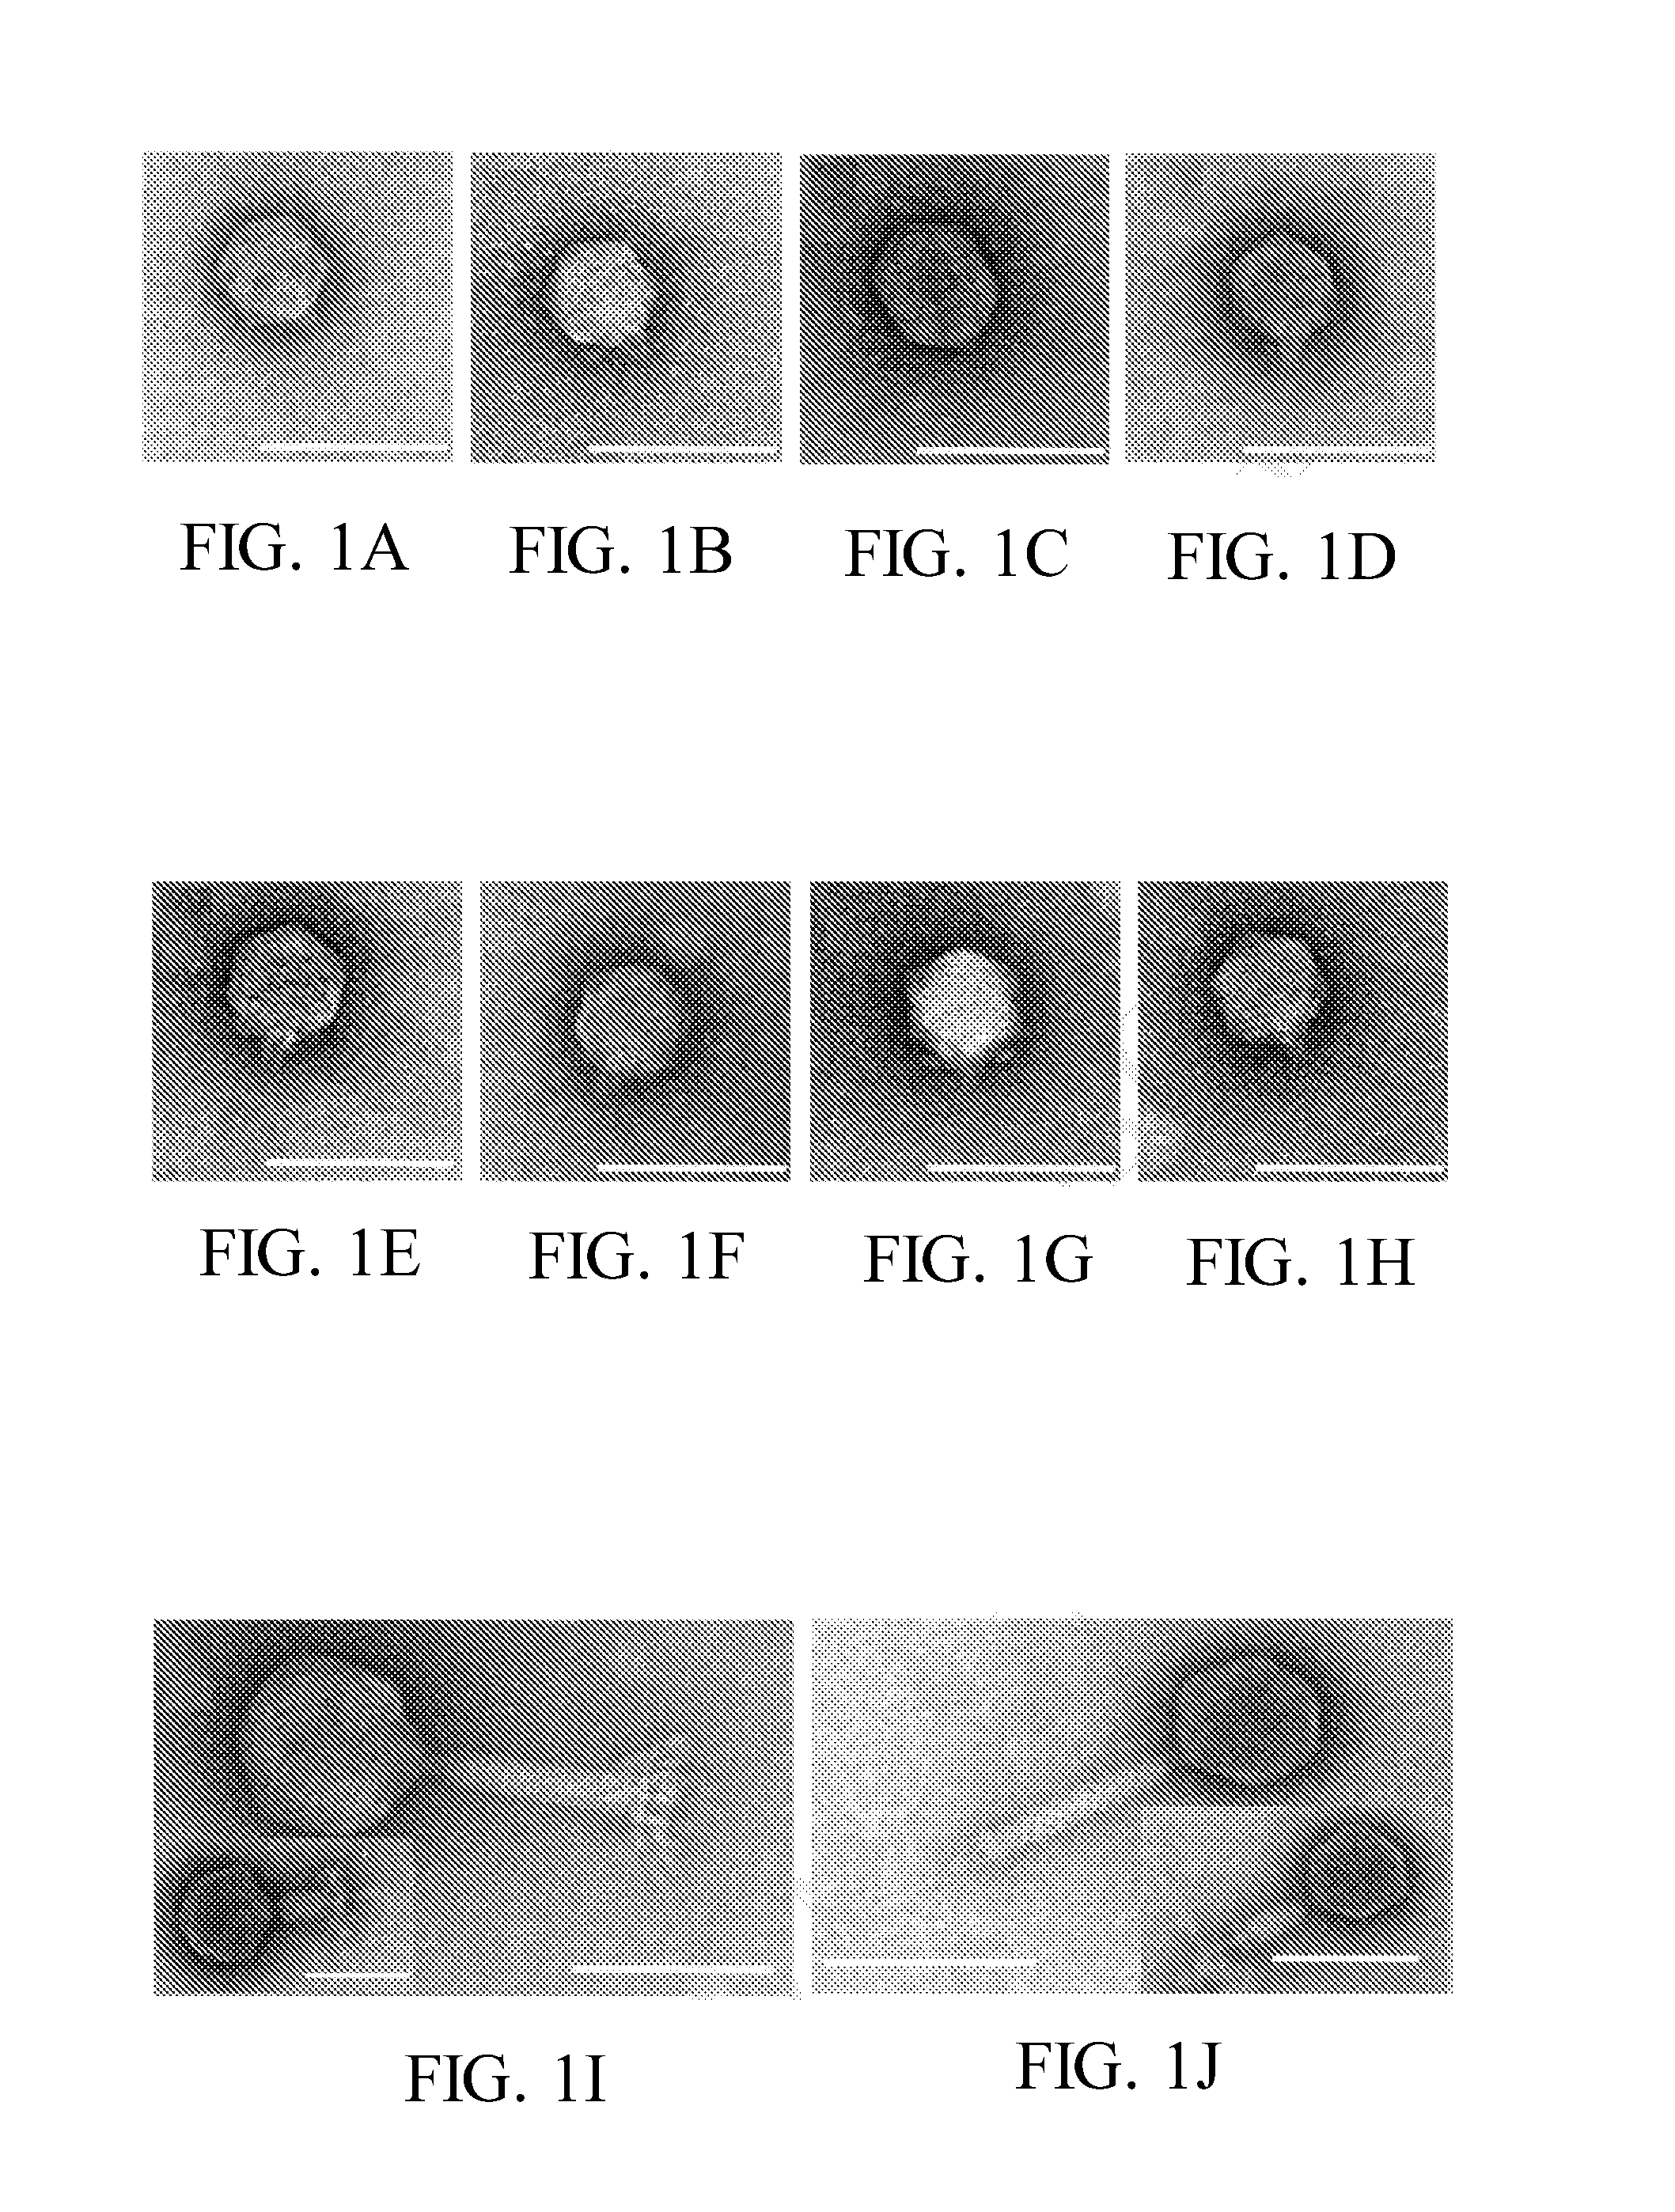 Disinfectant composition comprising phage